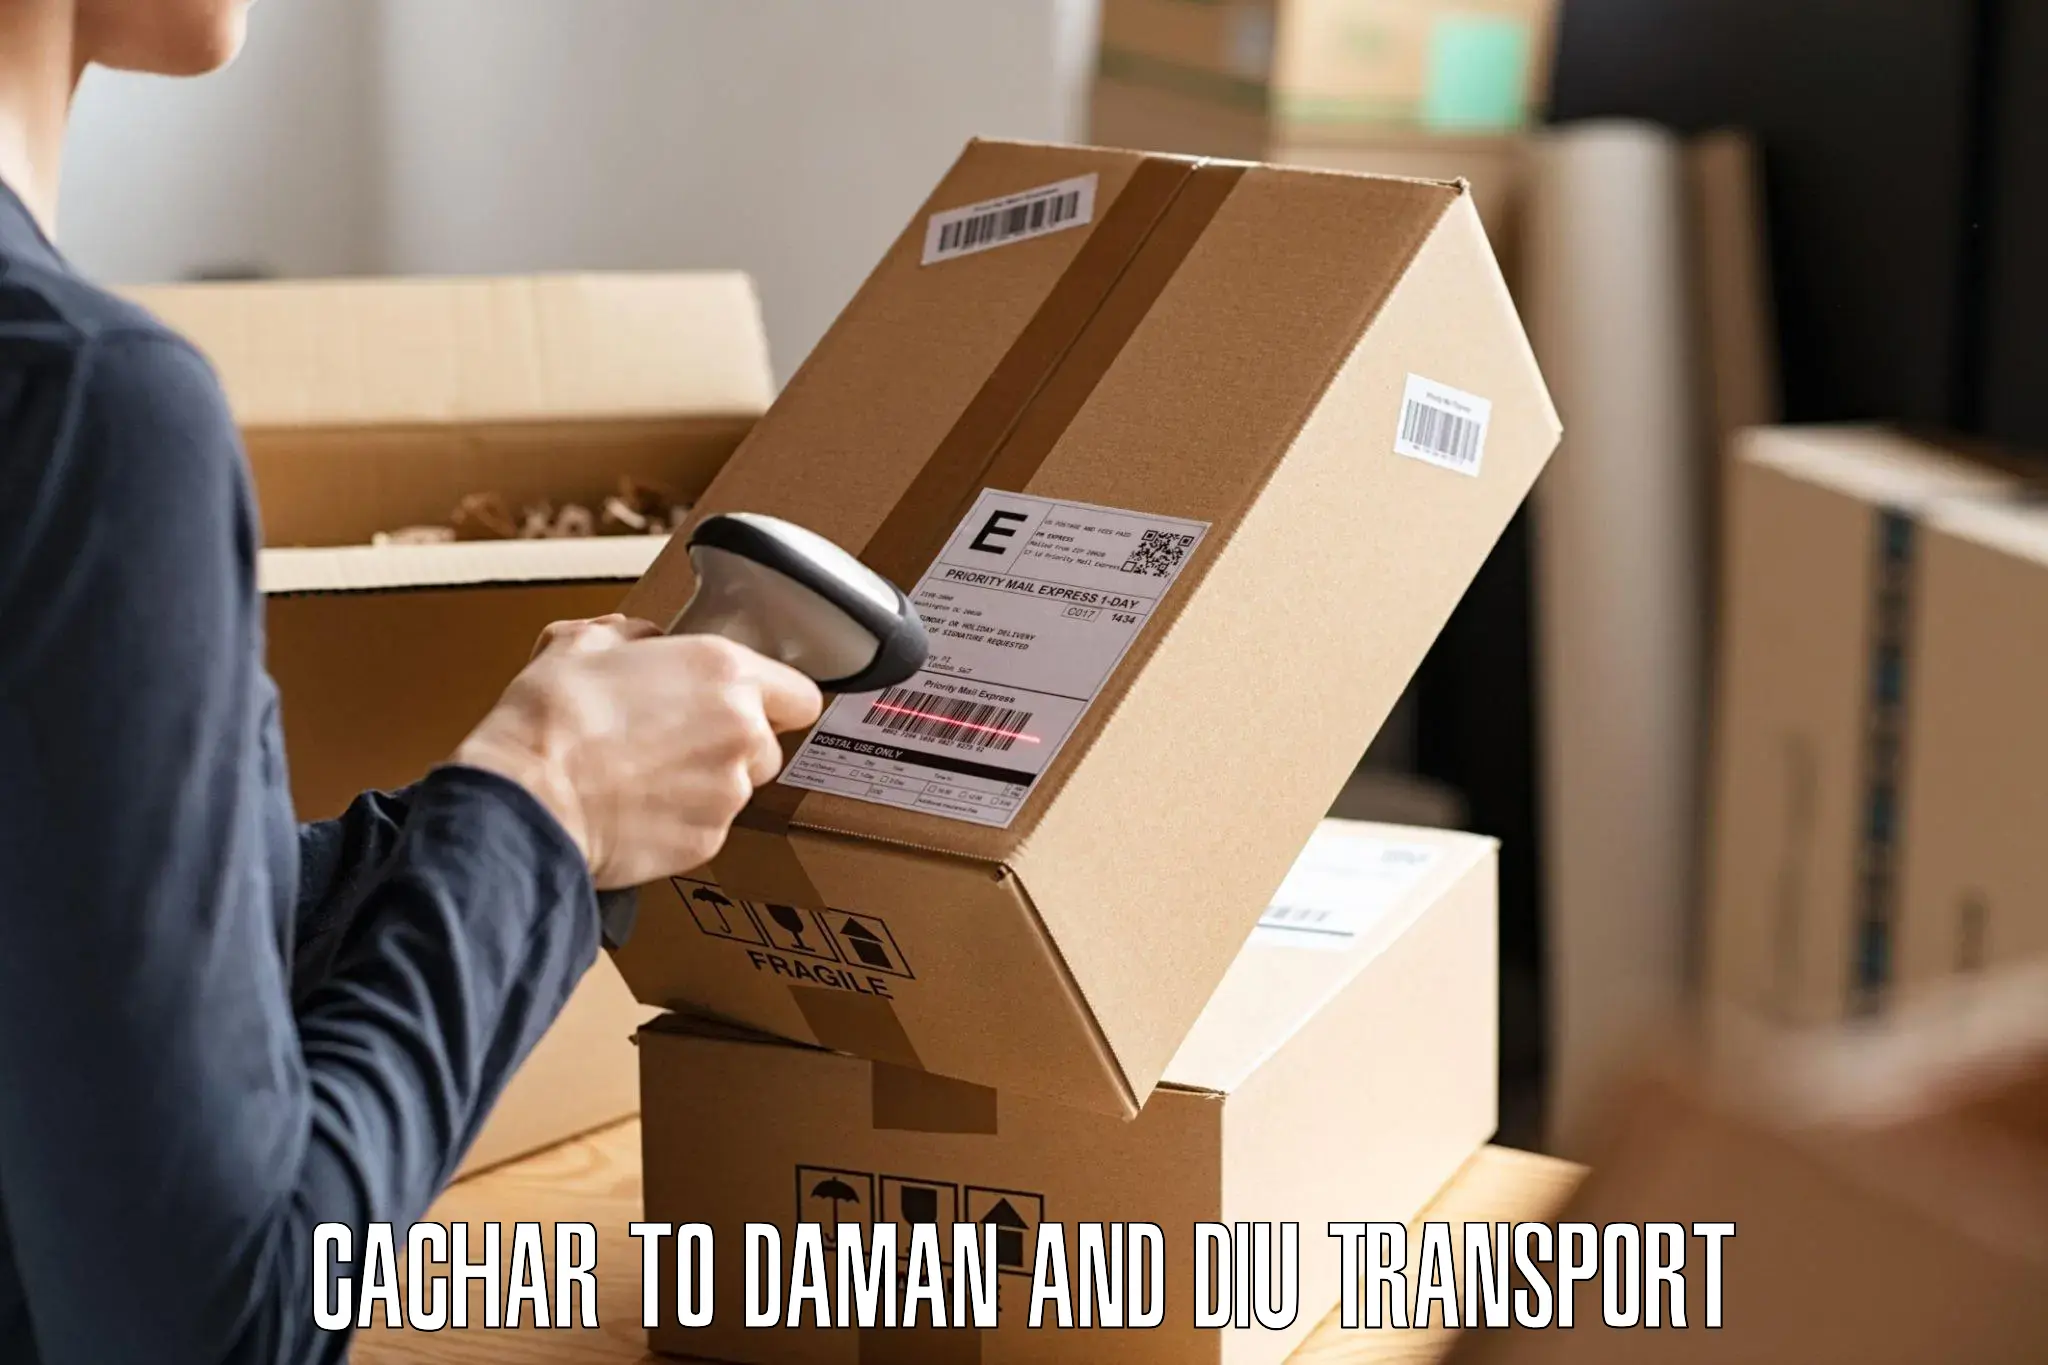 Nationwide transport services Cachar to Daman